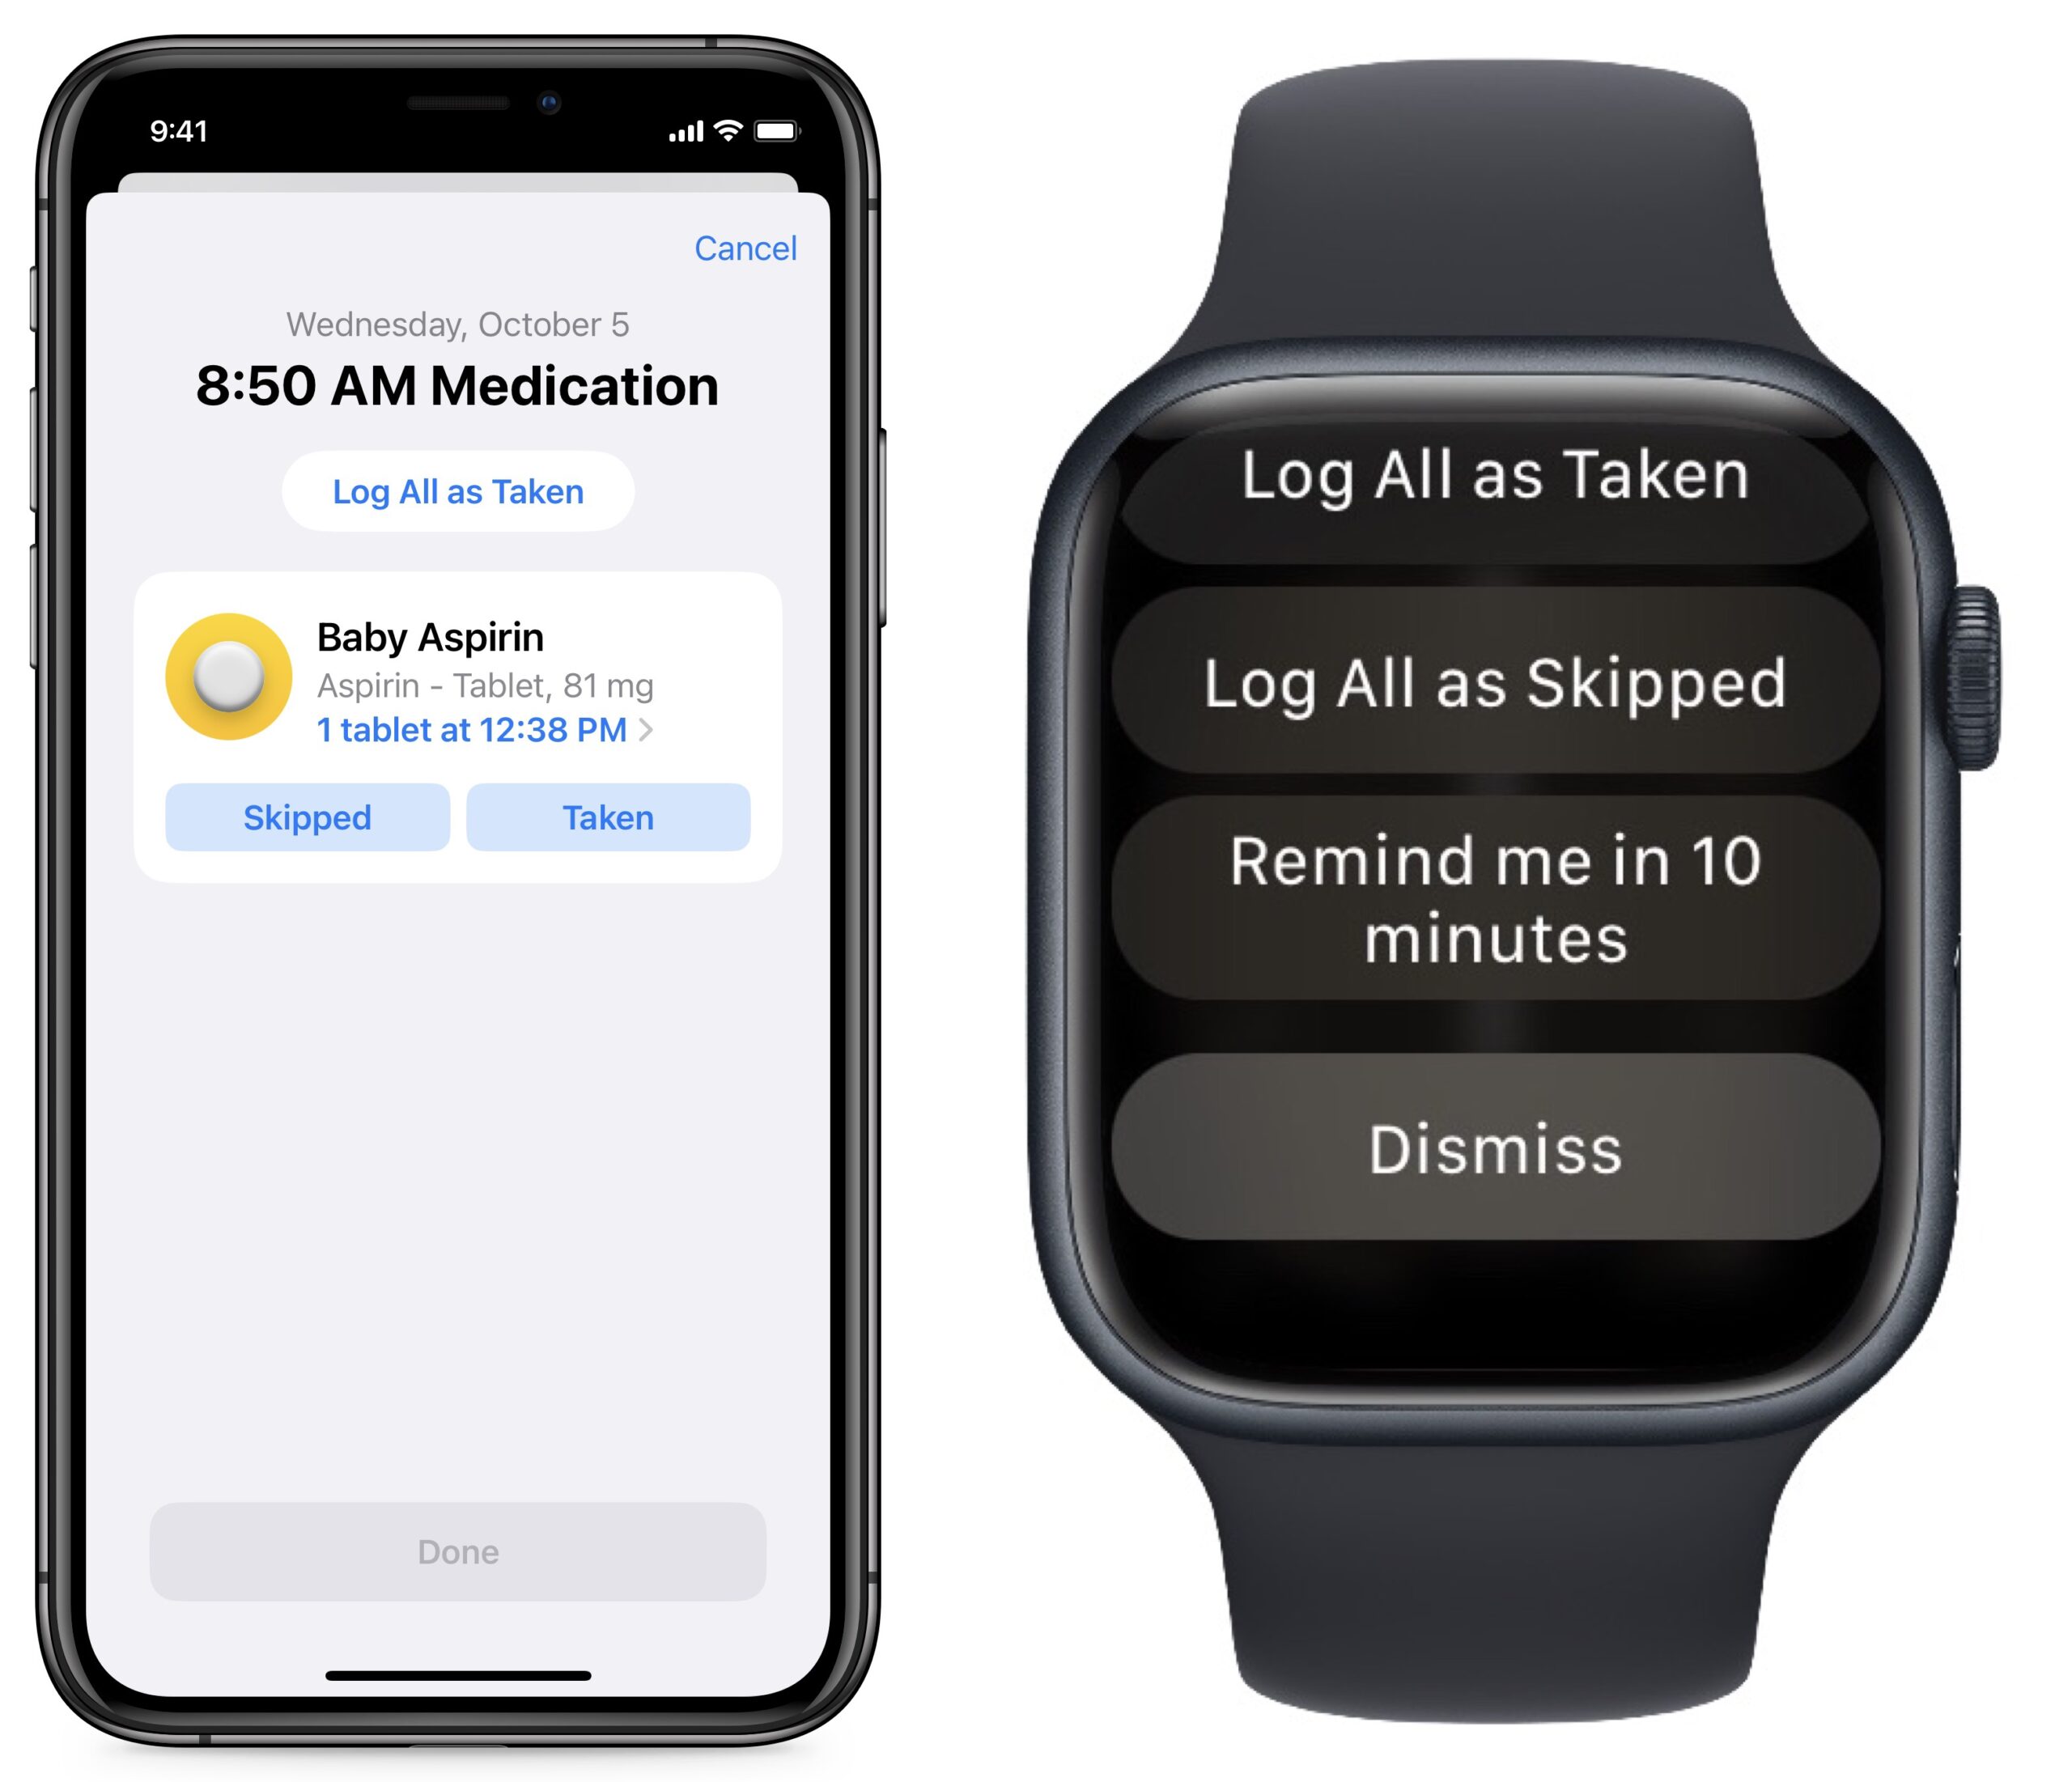 Medication notifications on iPhone and Apple Watch